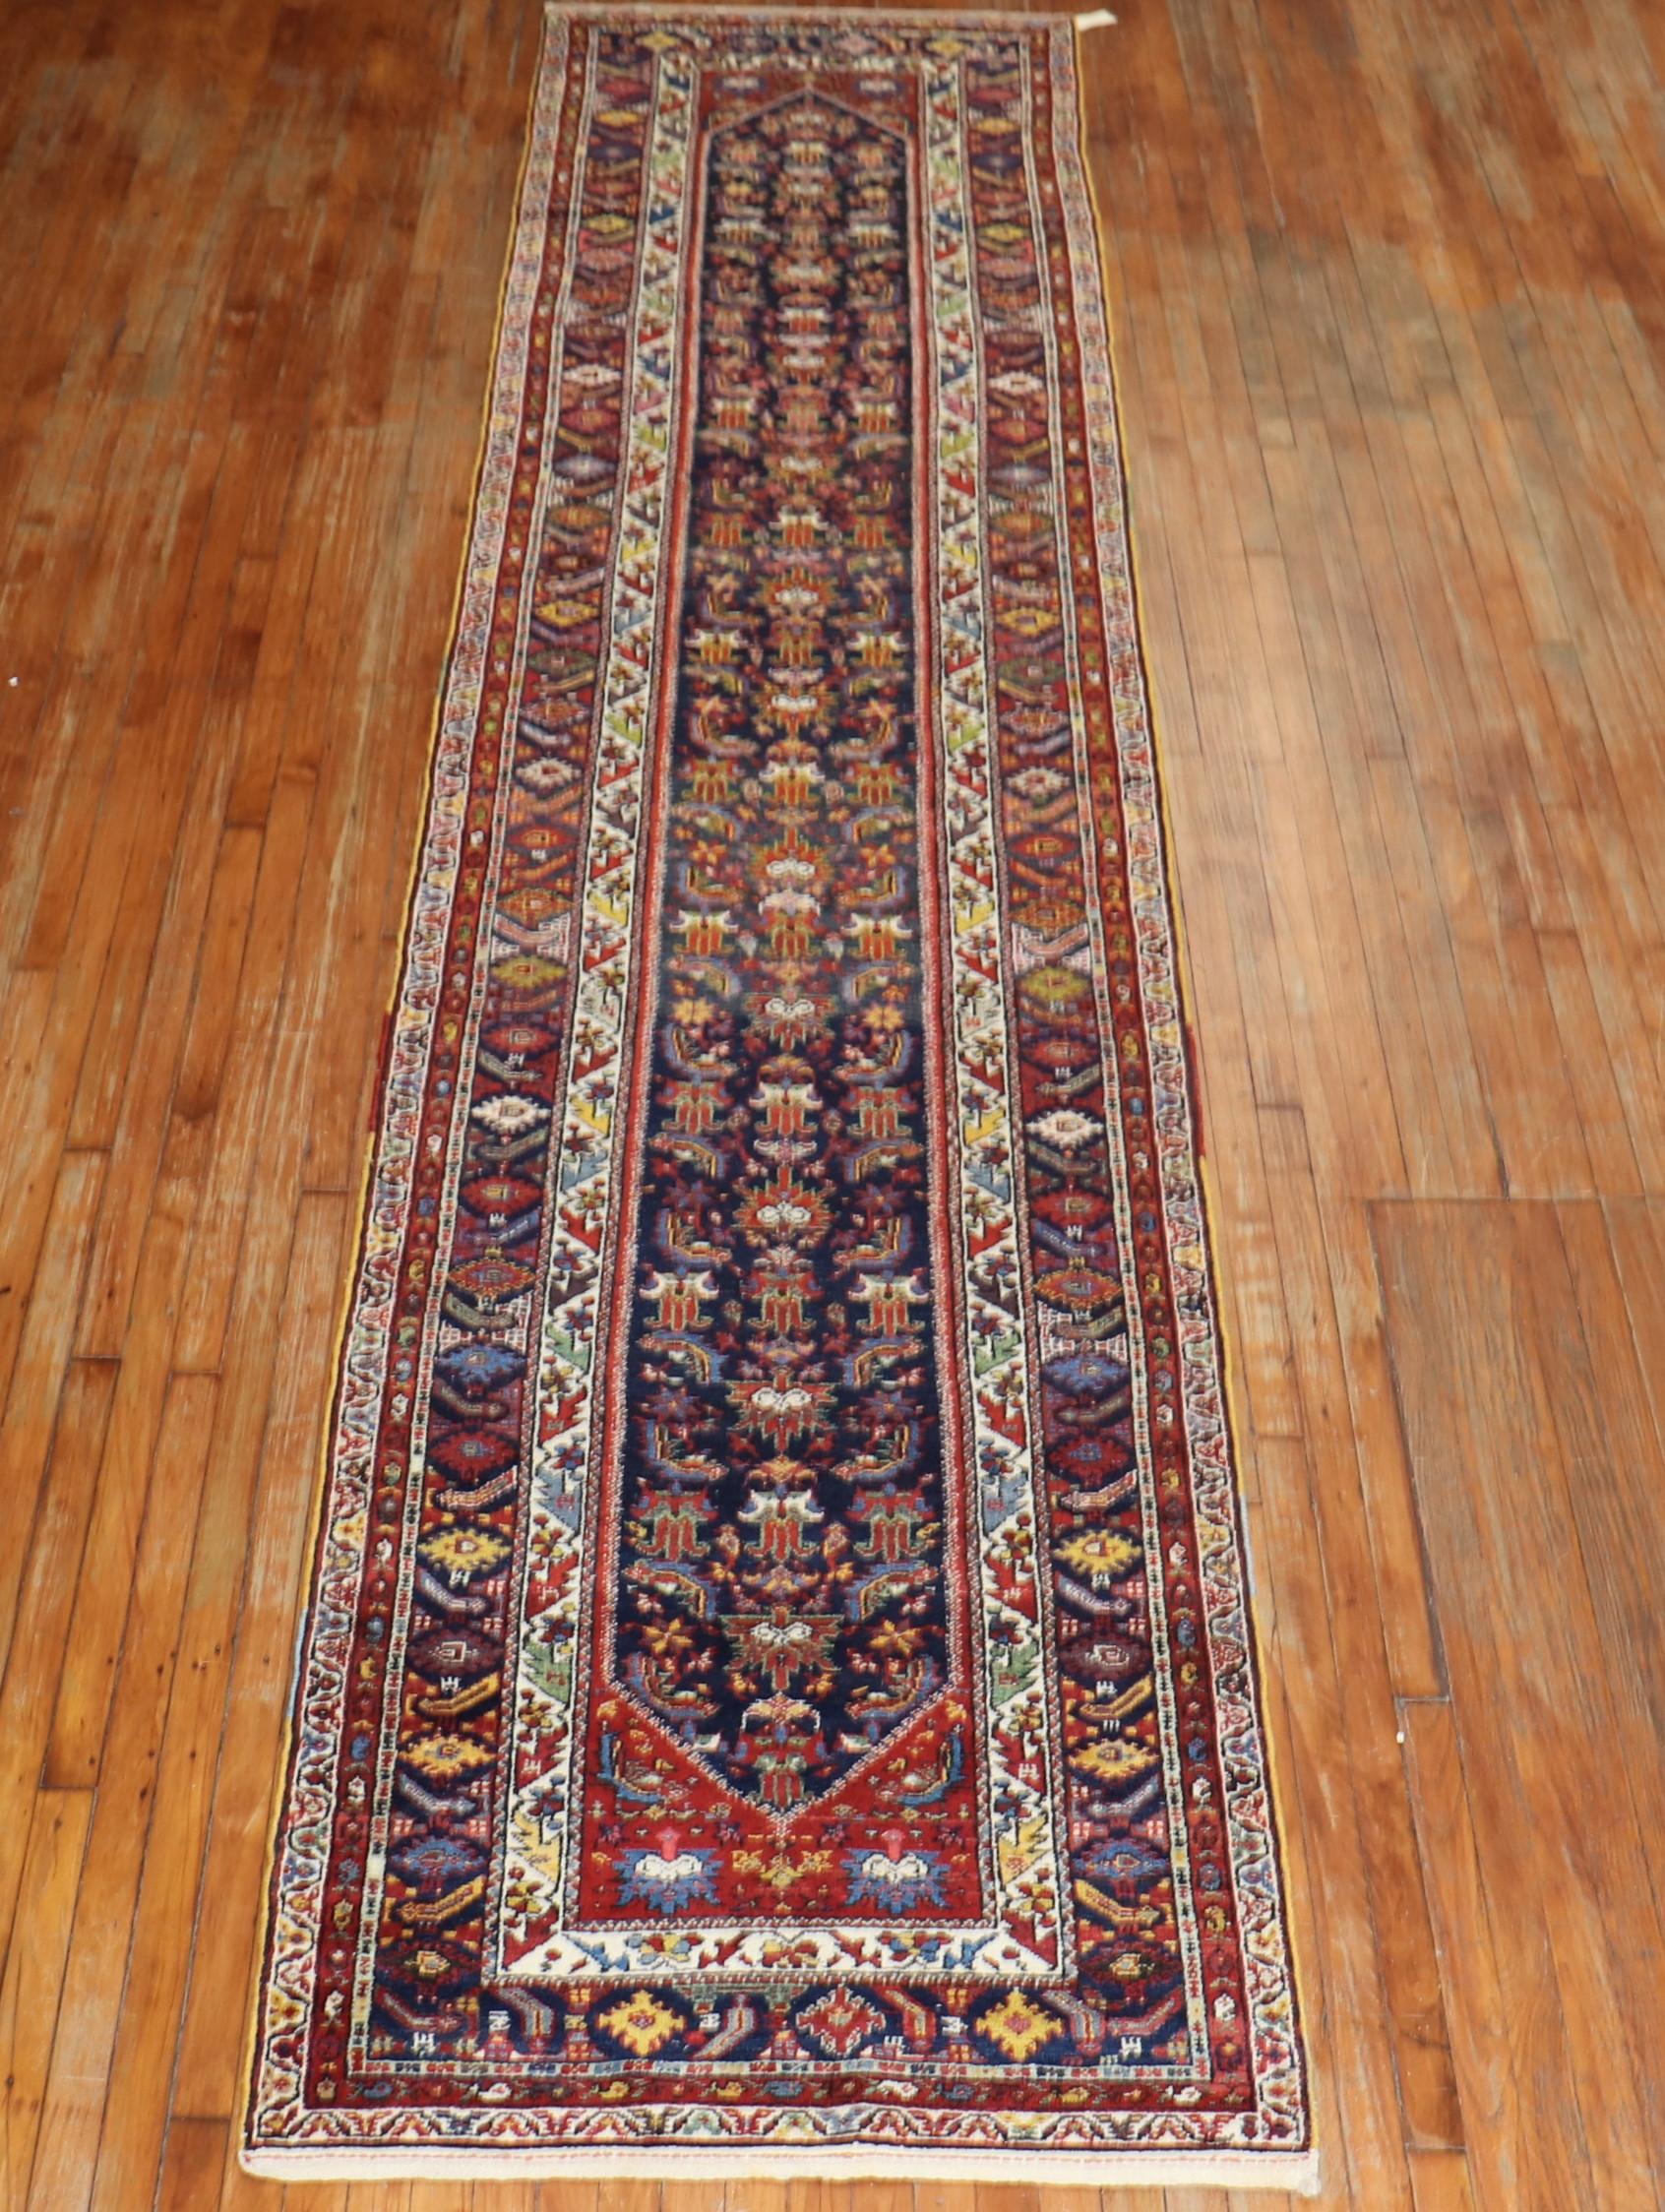 A traditional navy field Persian Malayer runner from the early 20th century.

Measures: 3'4” x 15'4”.